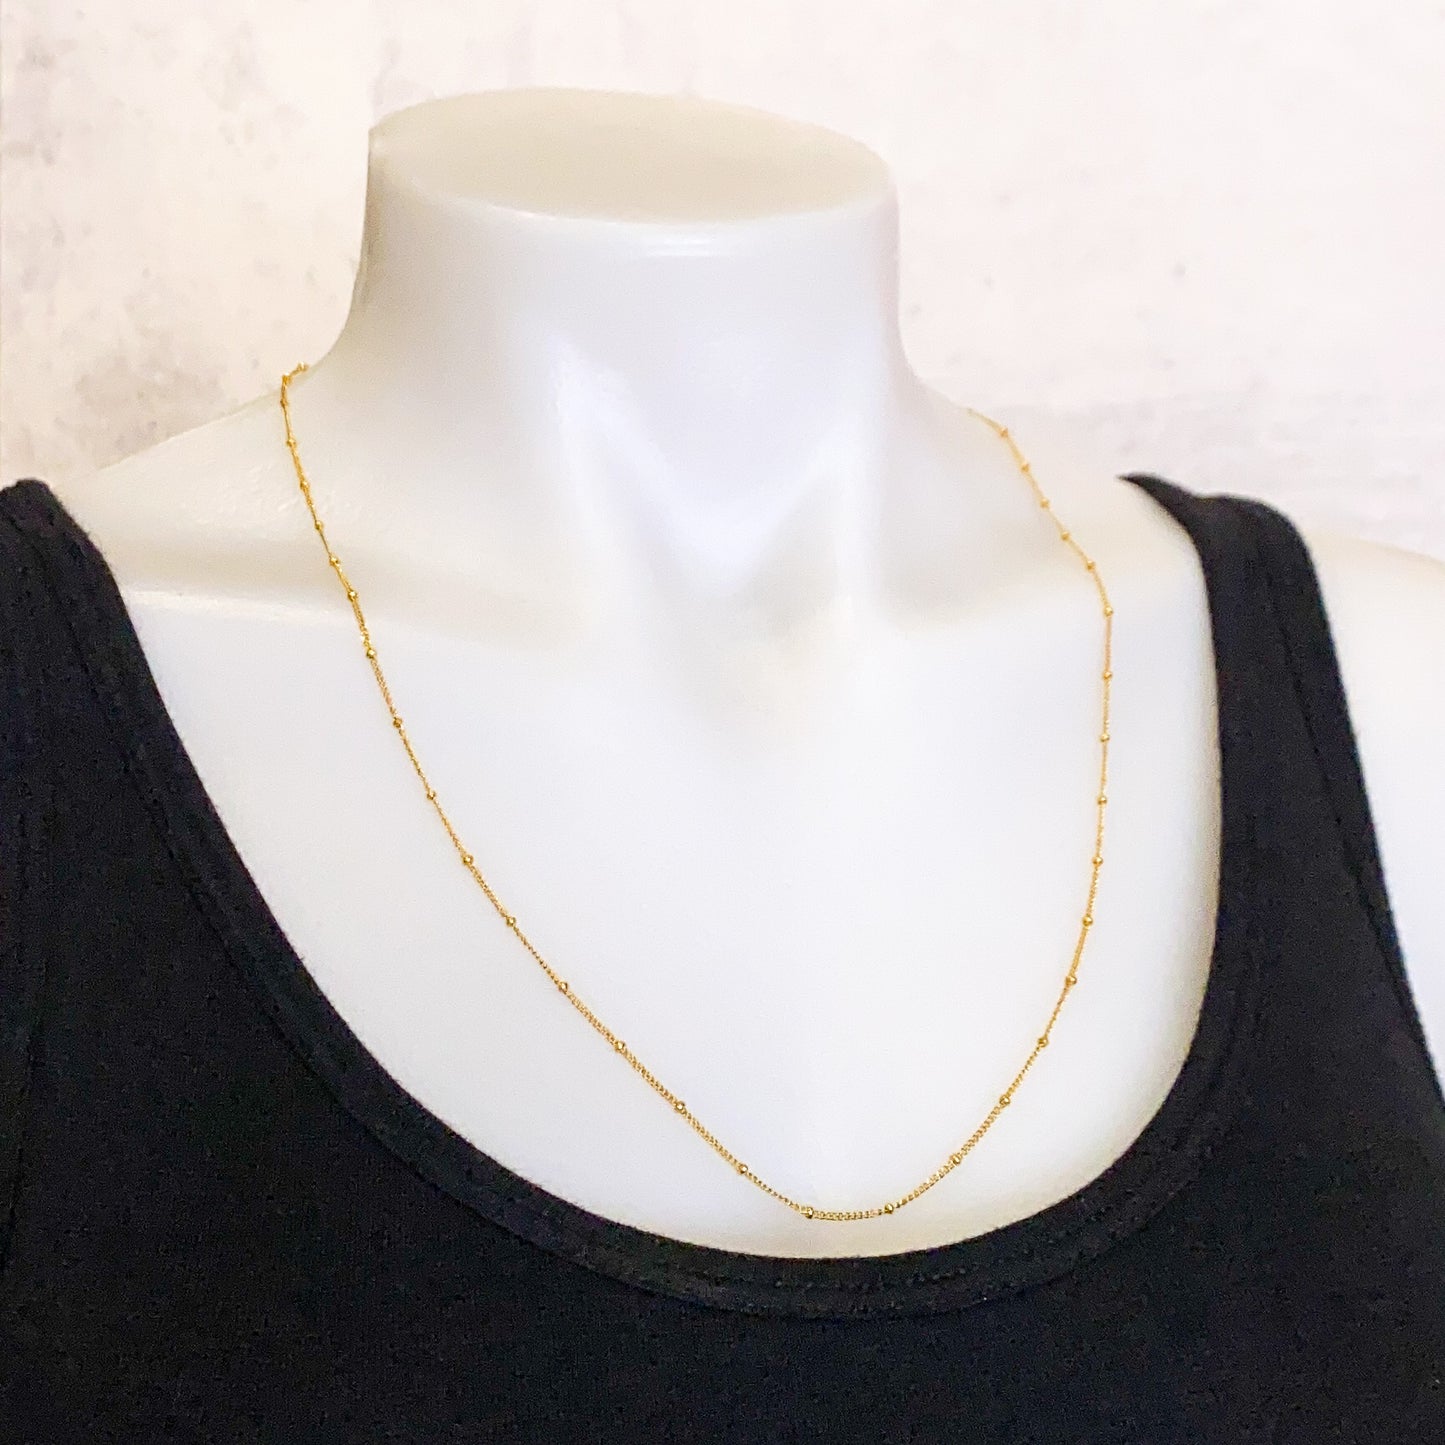 24" Satellite Necklace Chain (Gold Filled)